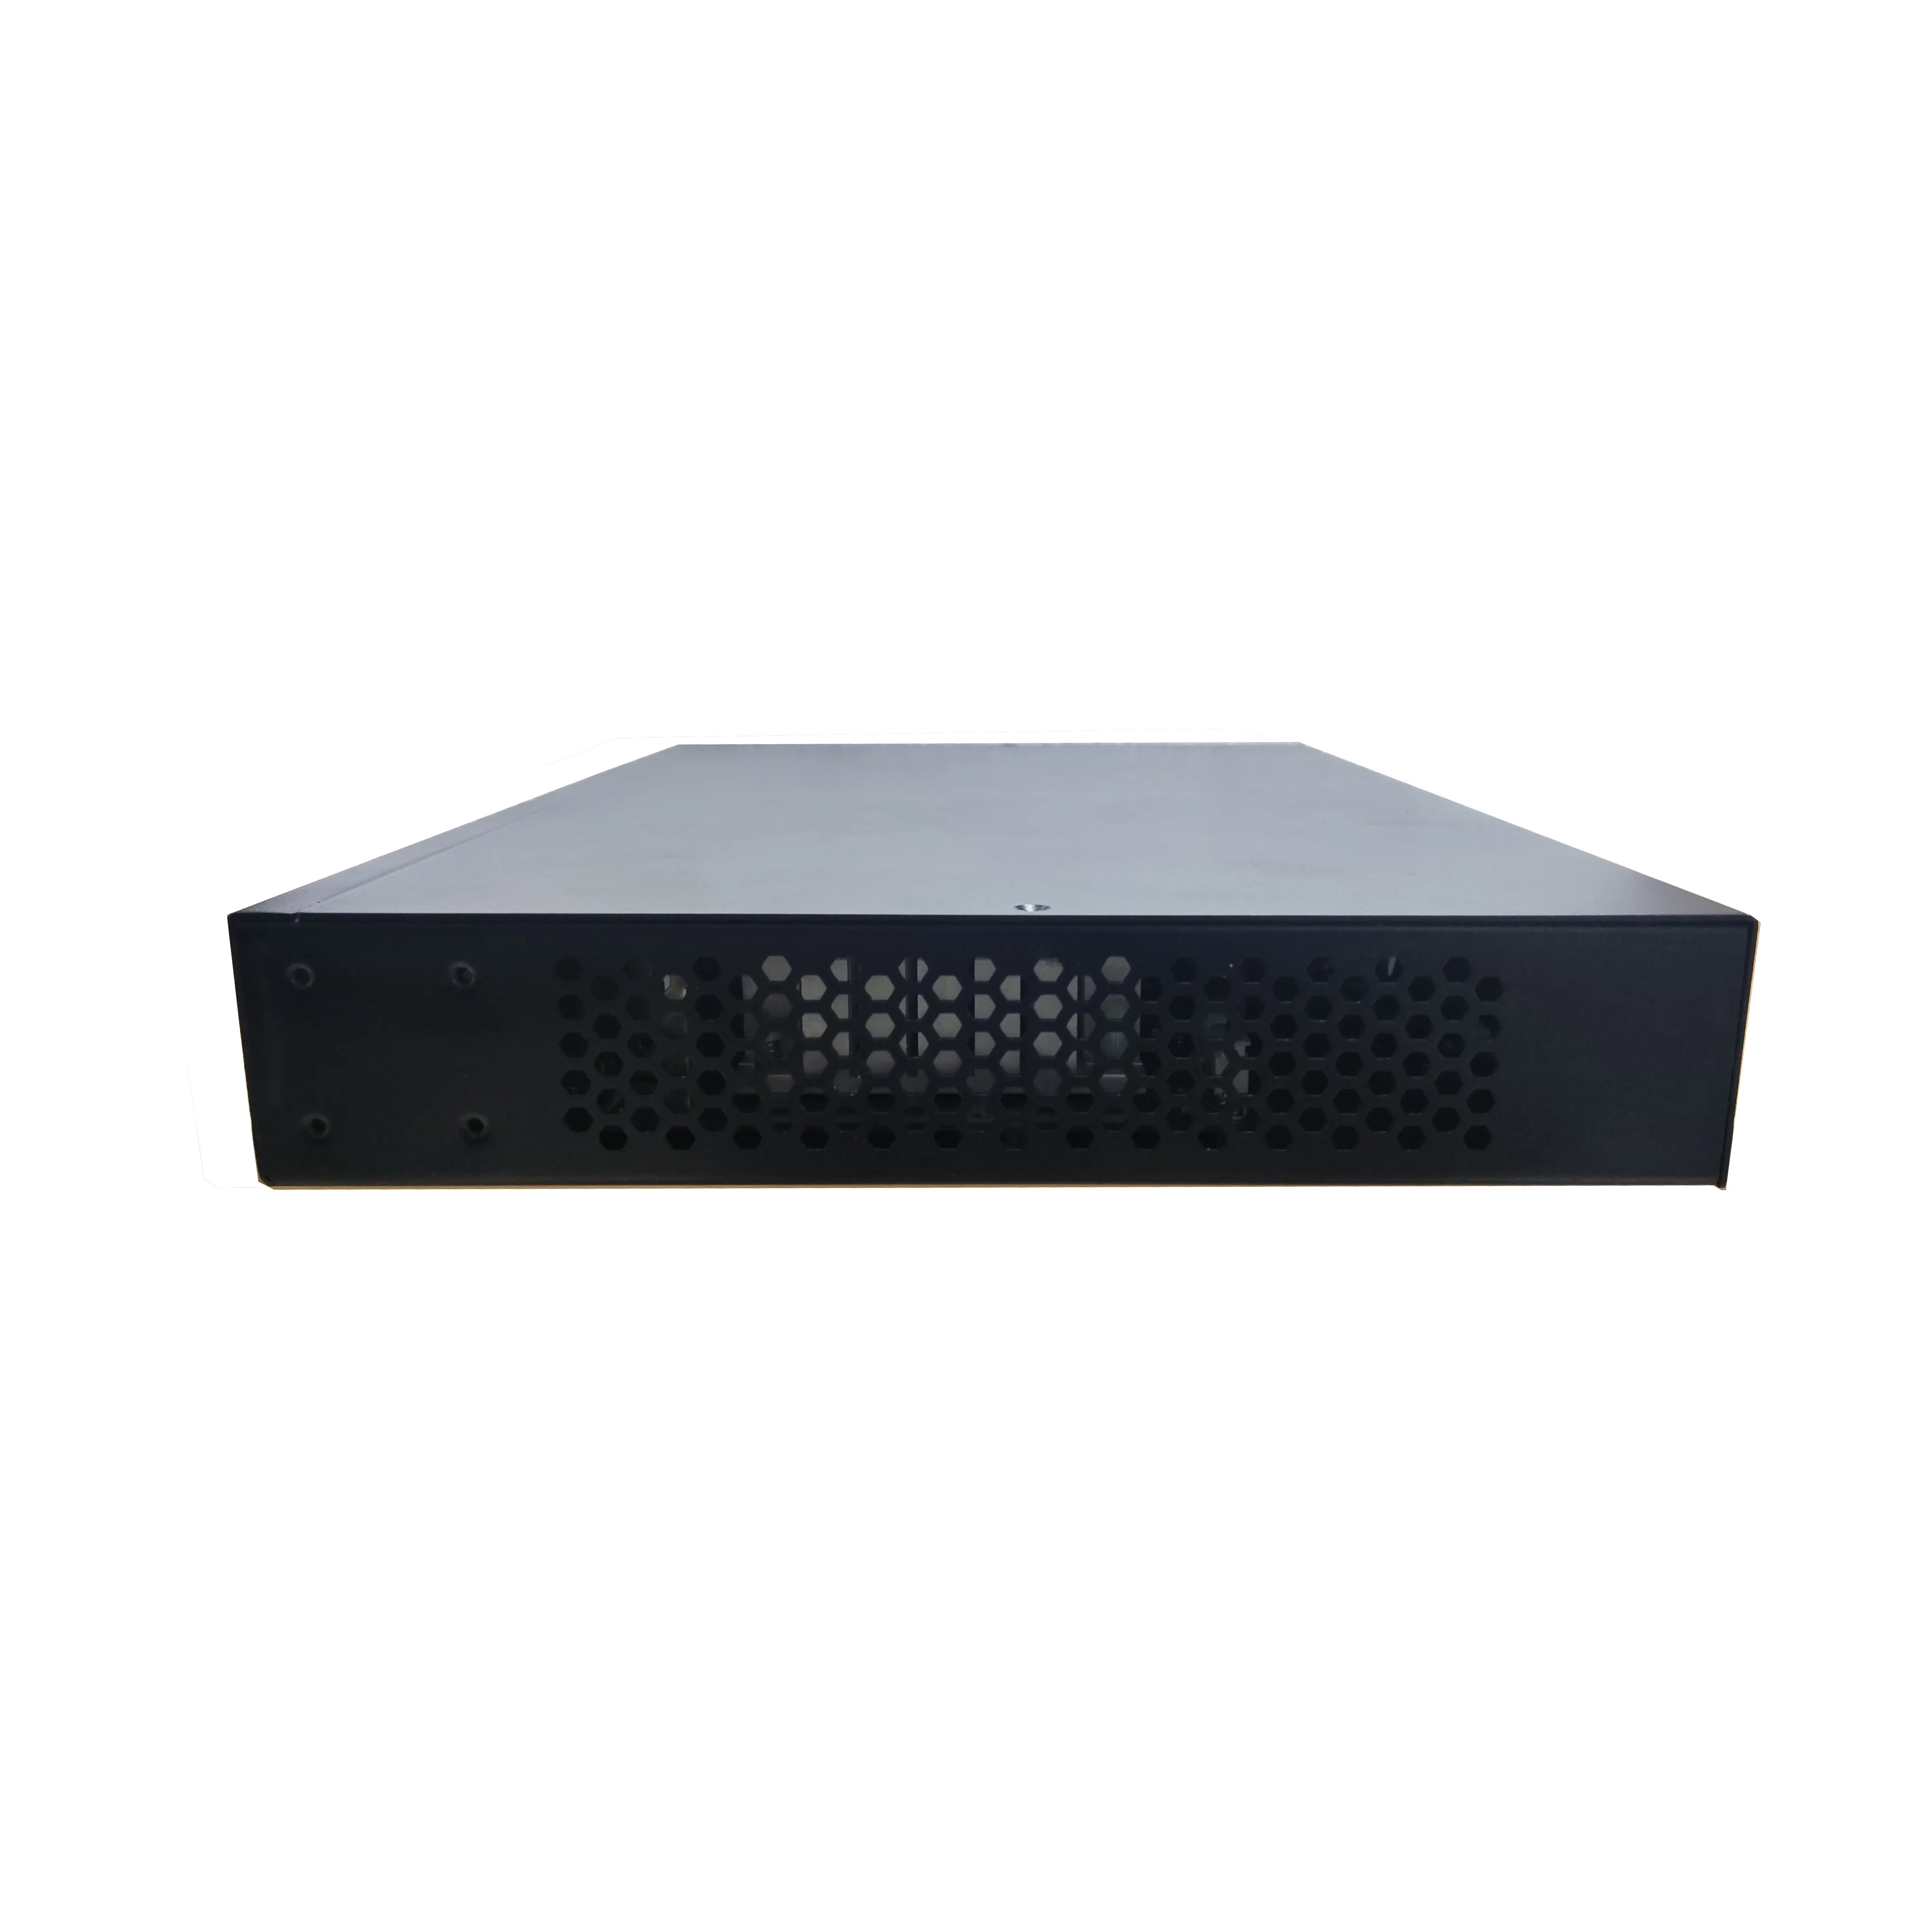 8 Port Smart 2.5G AI PoE Network Switch with Watchdog Vlan Priority Dial Mode Factory Original